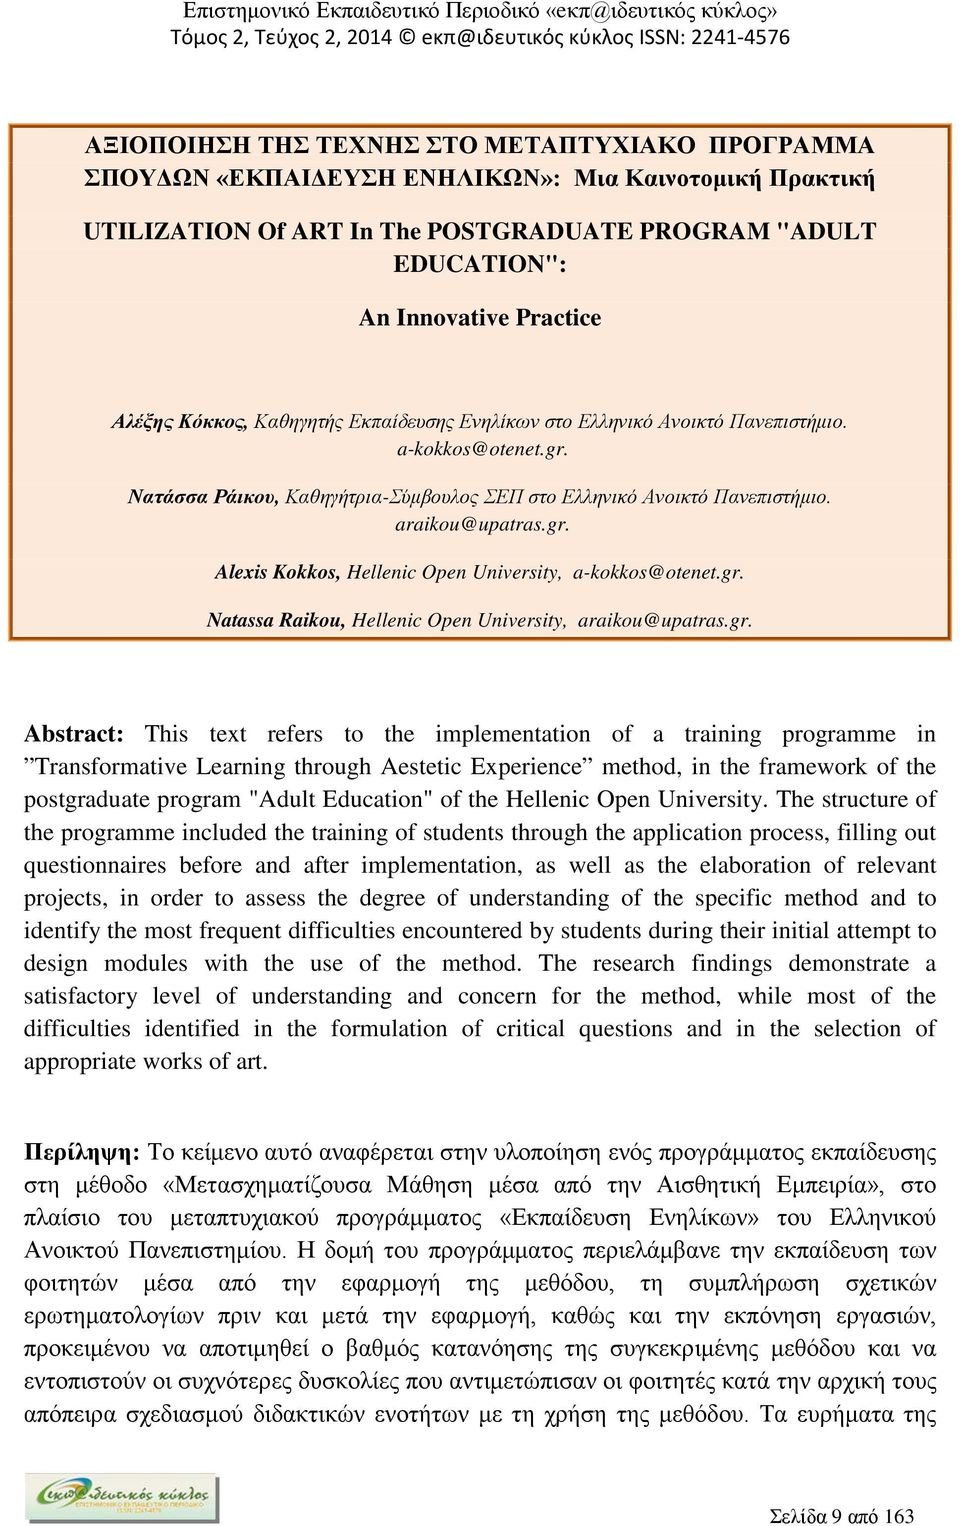 gr. Natassa Raikou, Hellenic Open University, araikou@upatras.gr. Abstract: This text refers to the implementation of a training programme in Transformative Learning through Aestetic Experience